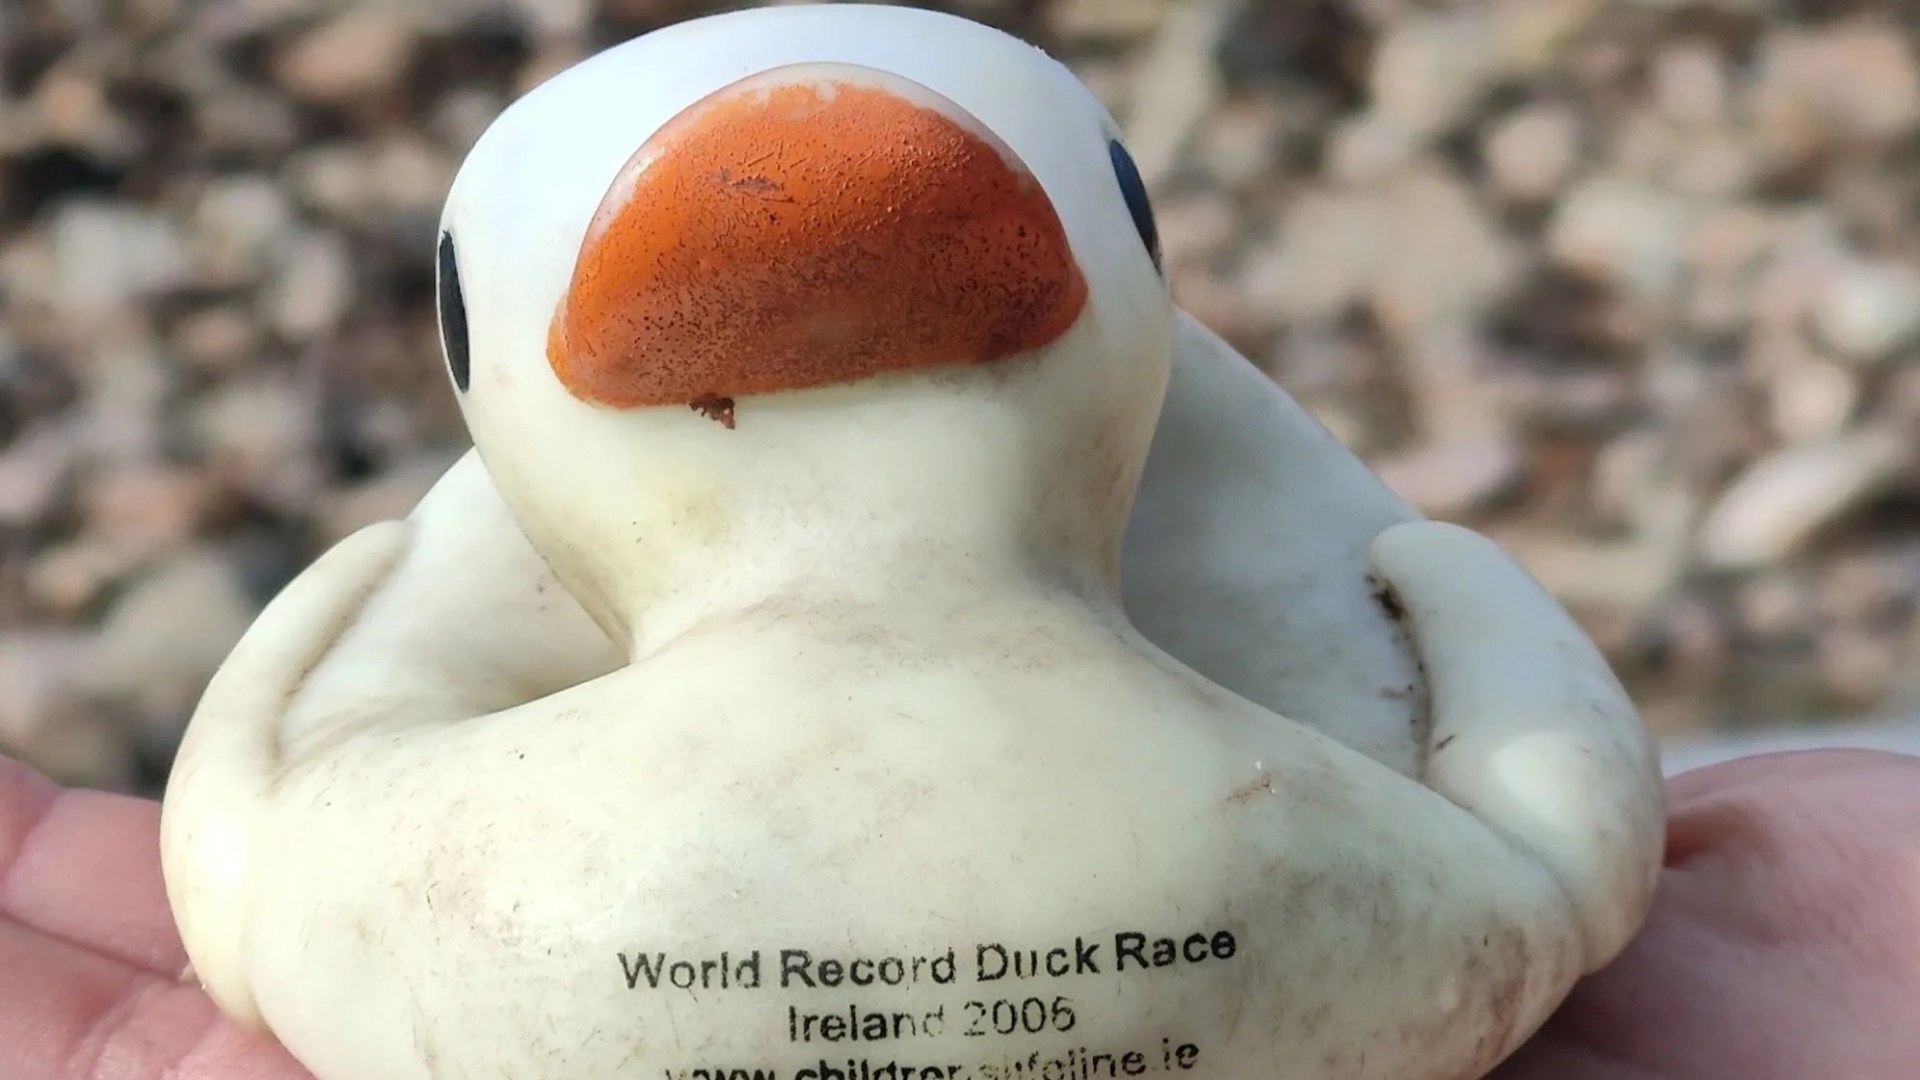 Rubber duck that escaped failed world record race in Ireland 18 years ago found 680km away